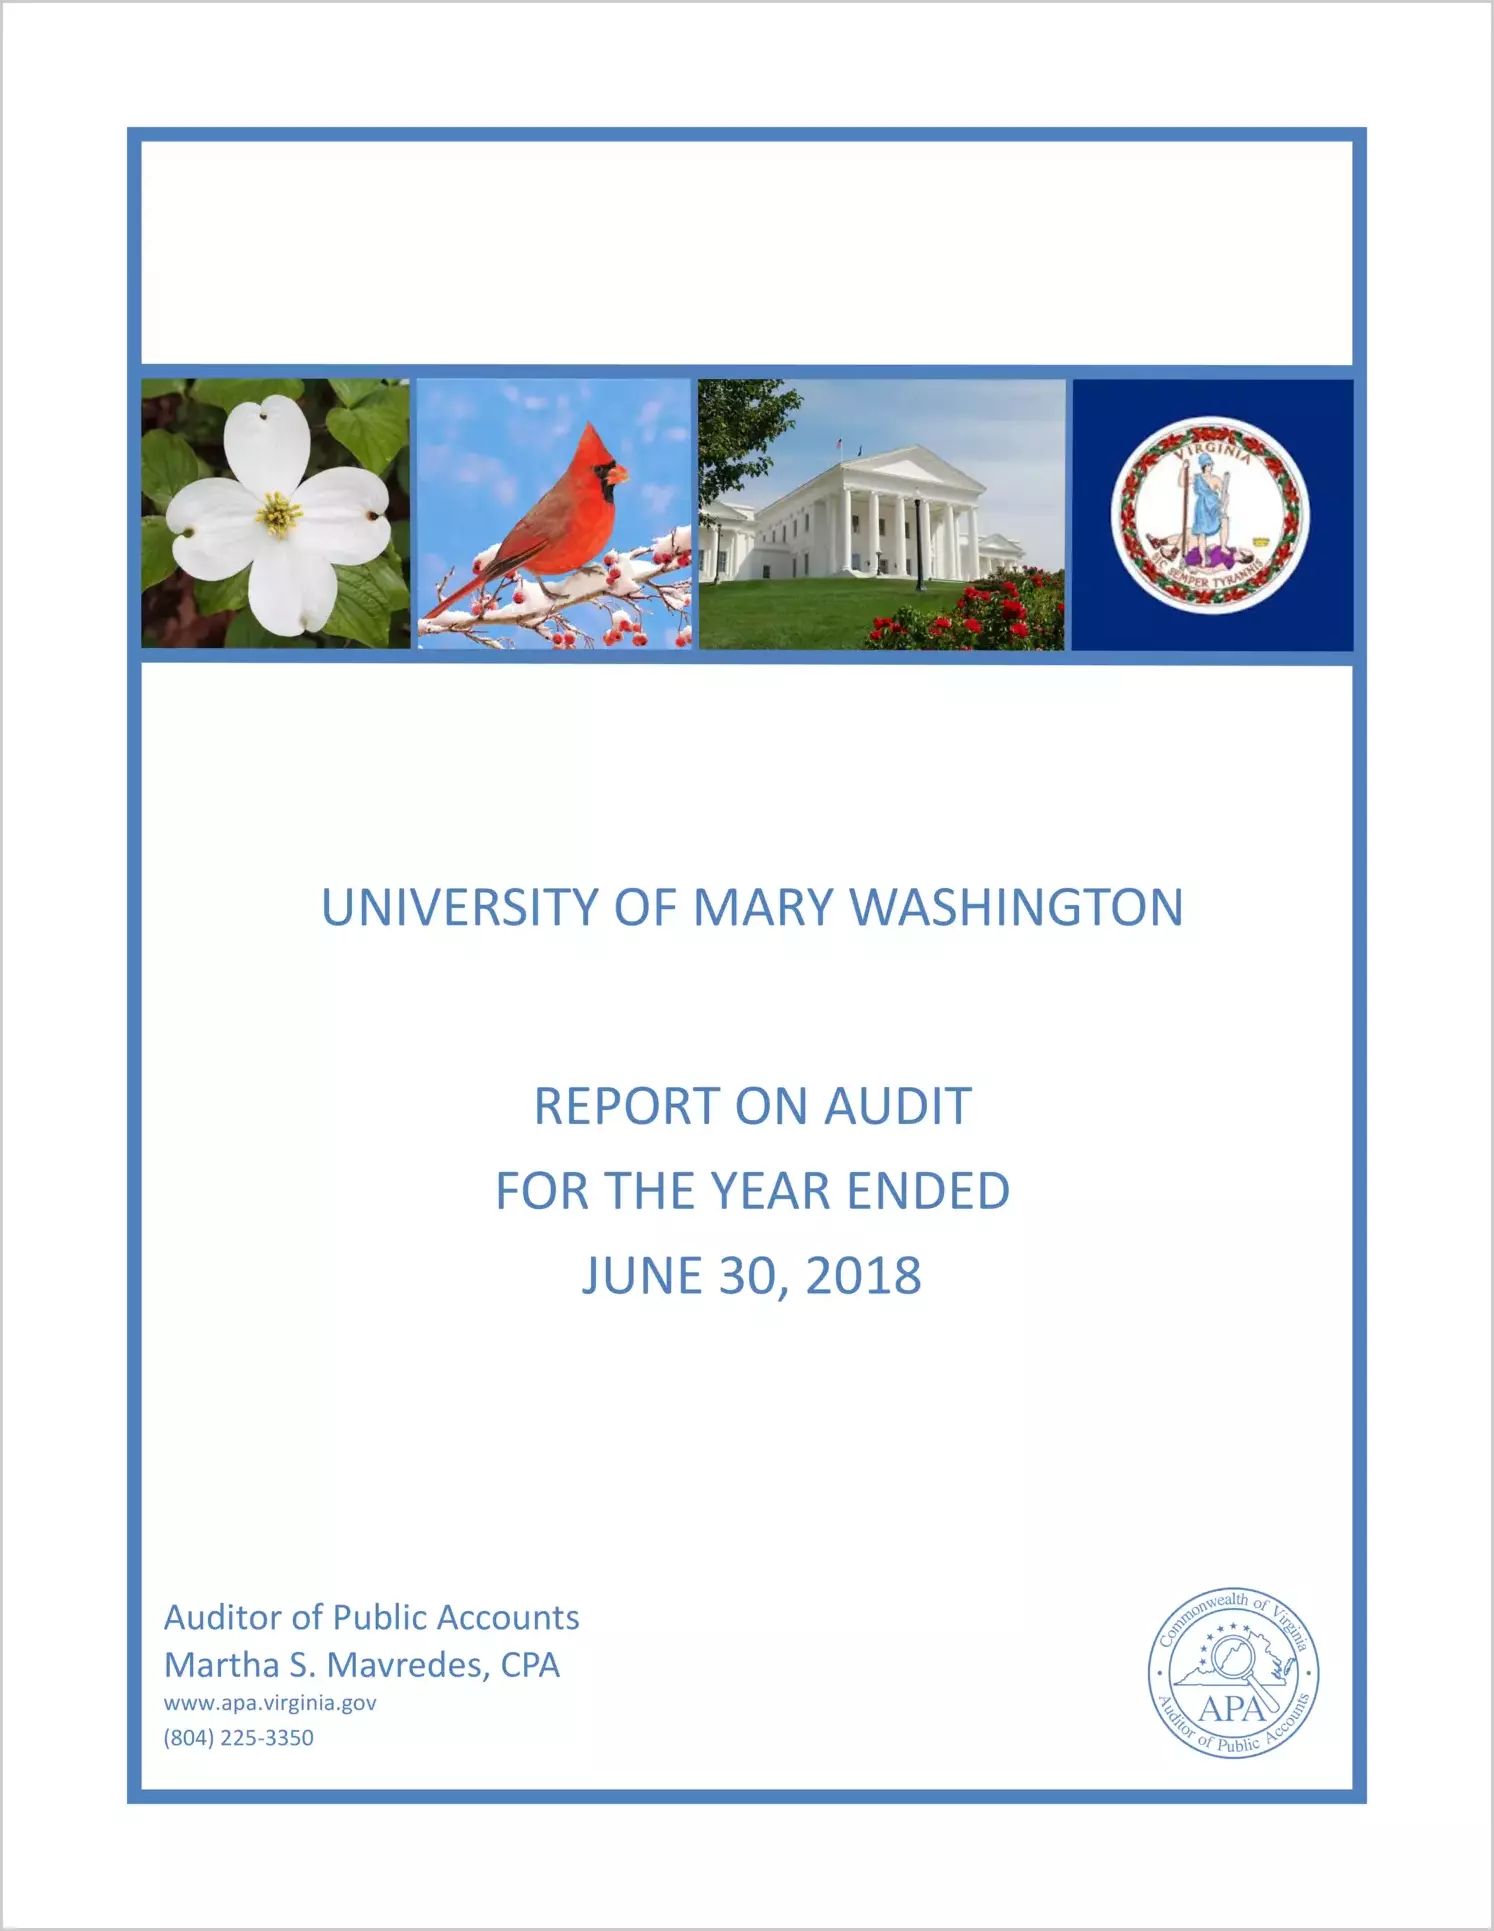 University of Mary Washington for the year ended June 30, 2018